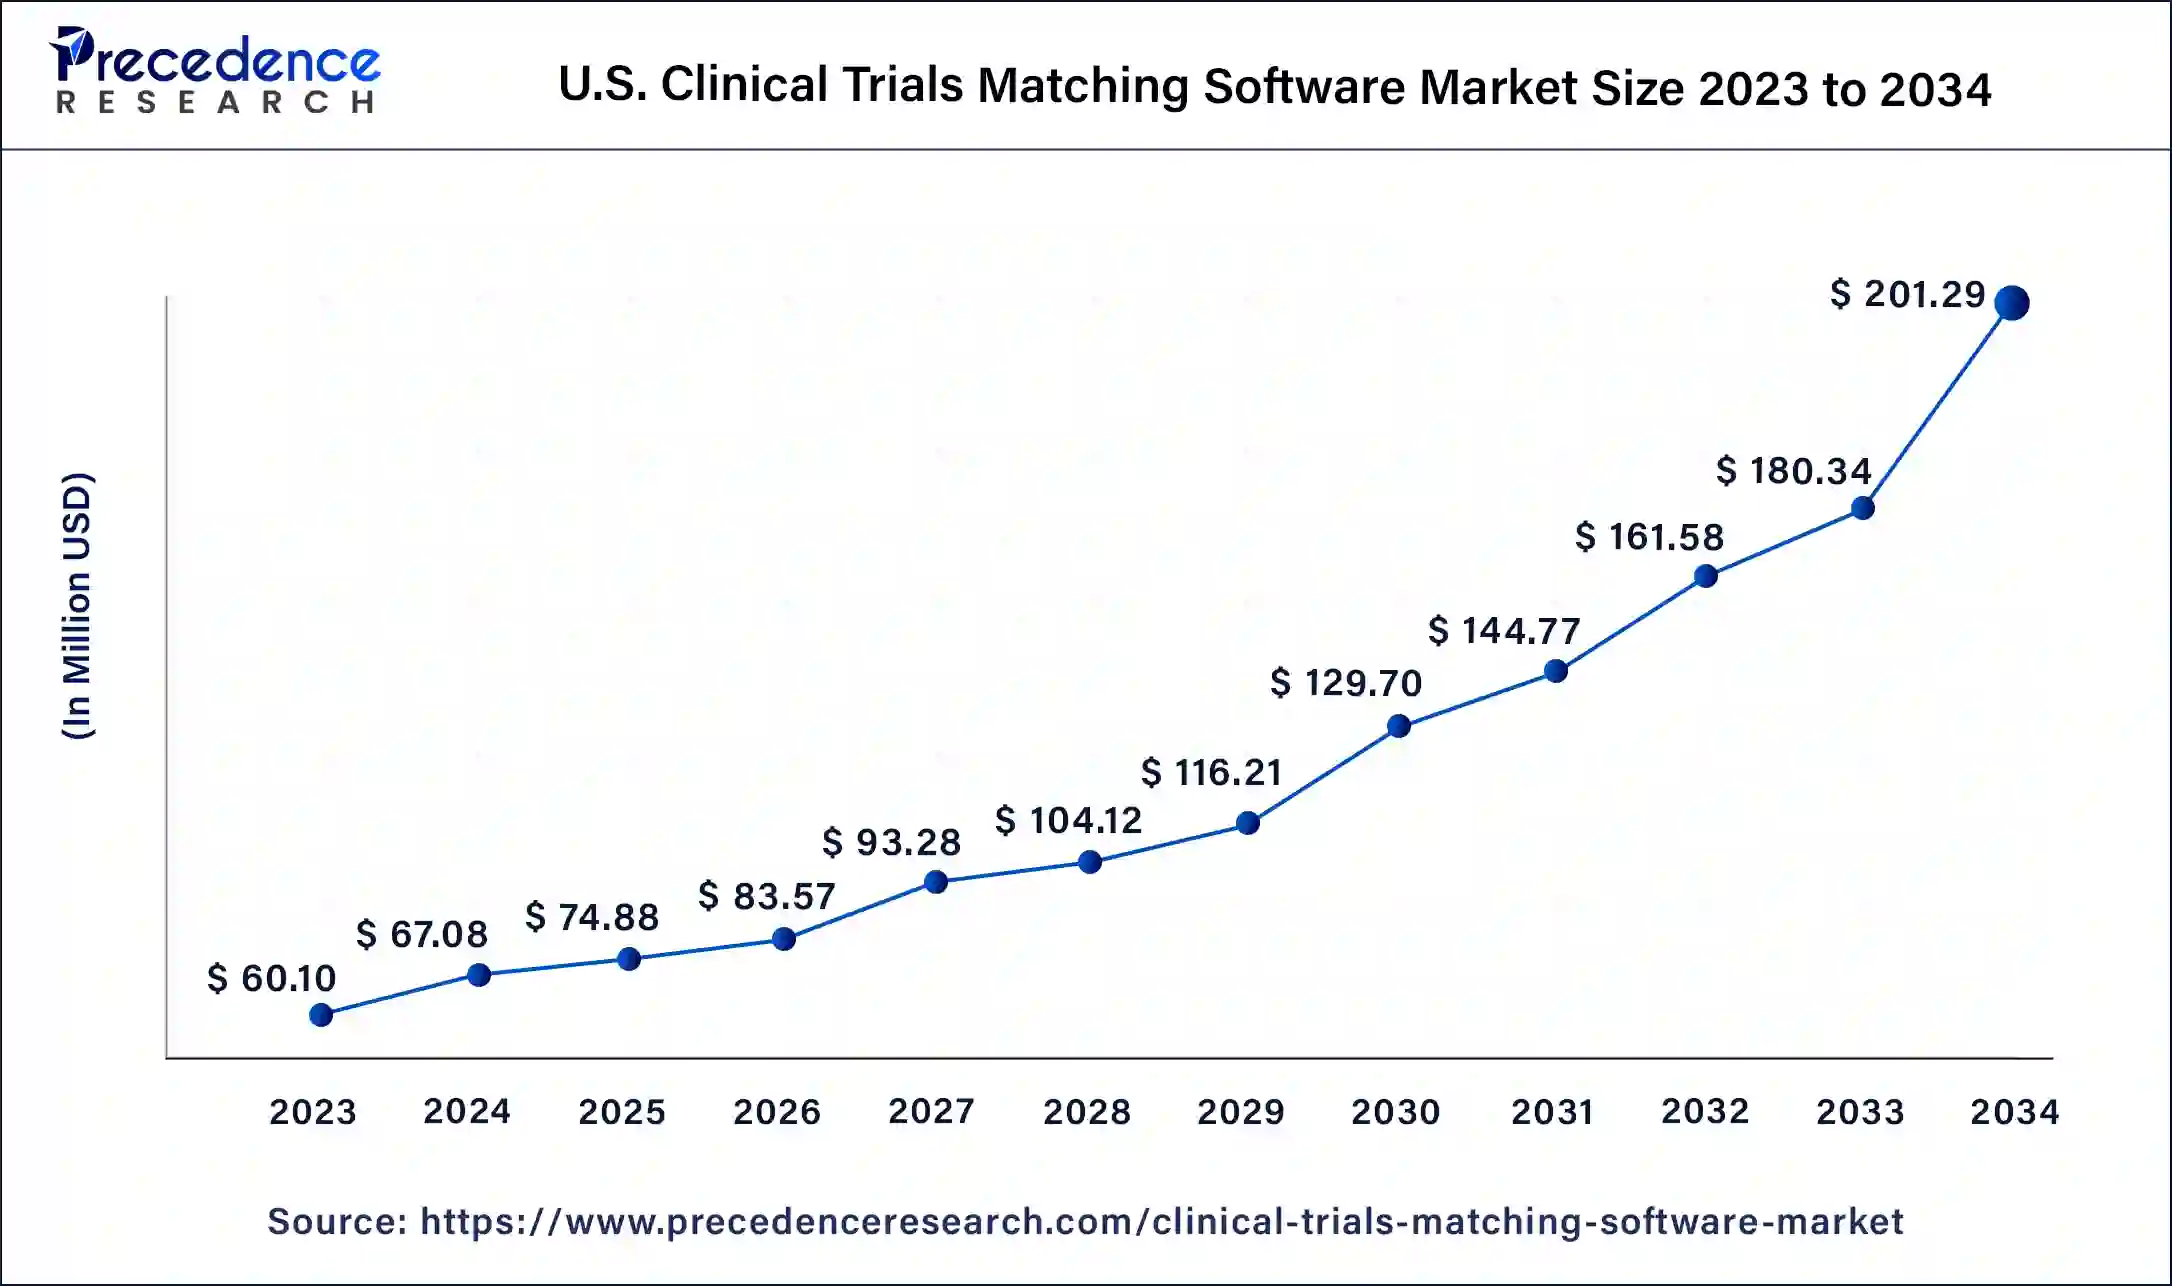 U.S. Clinical Trials Matching Software Market Size 2024 to 2034